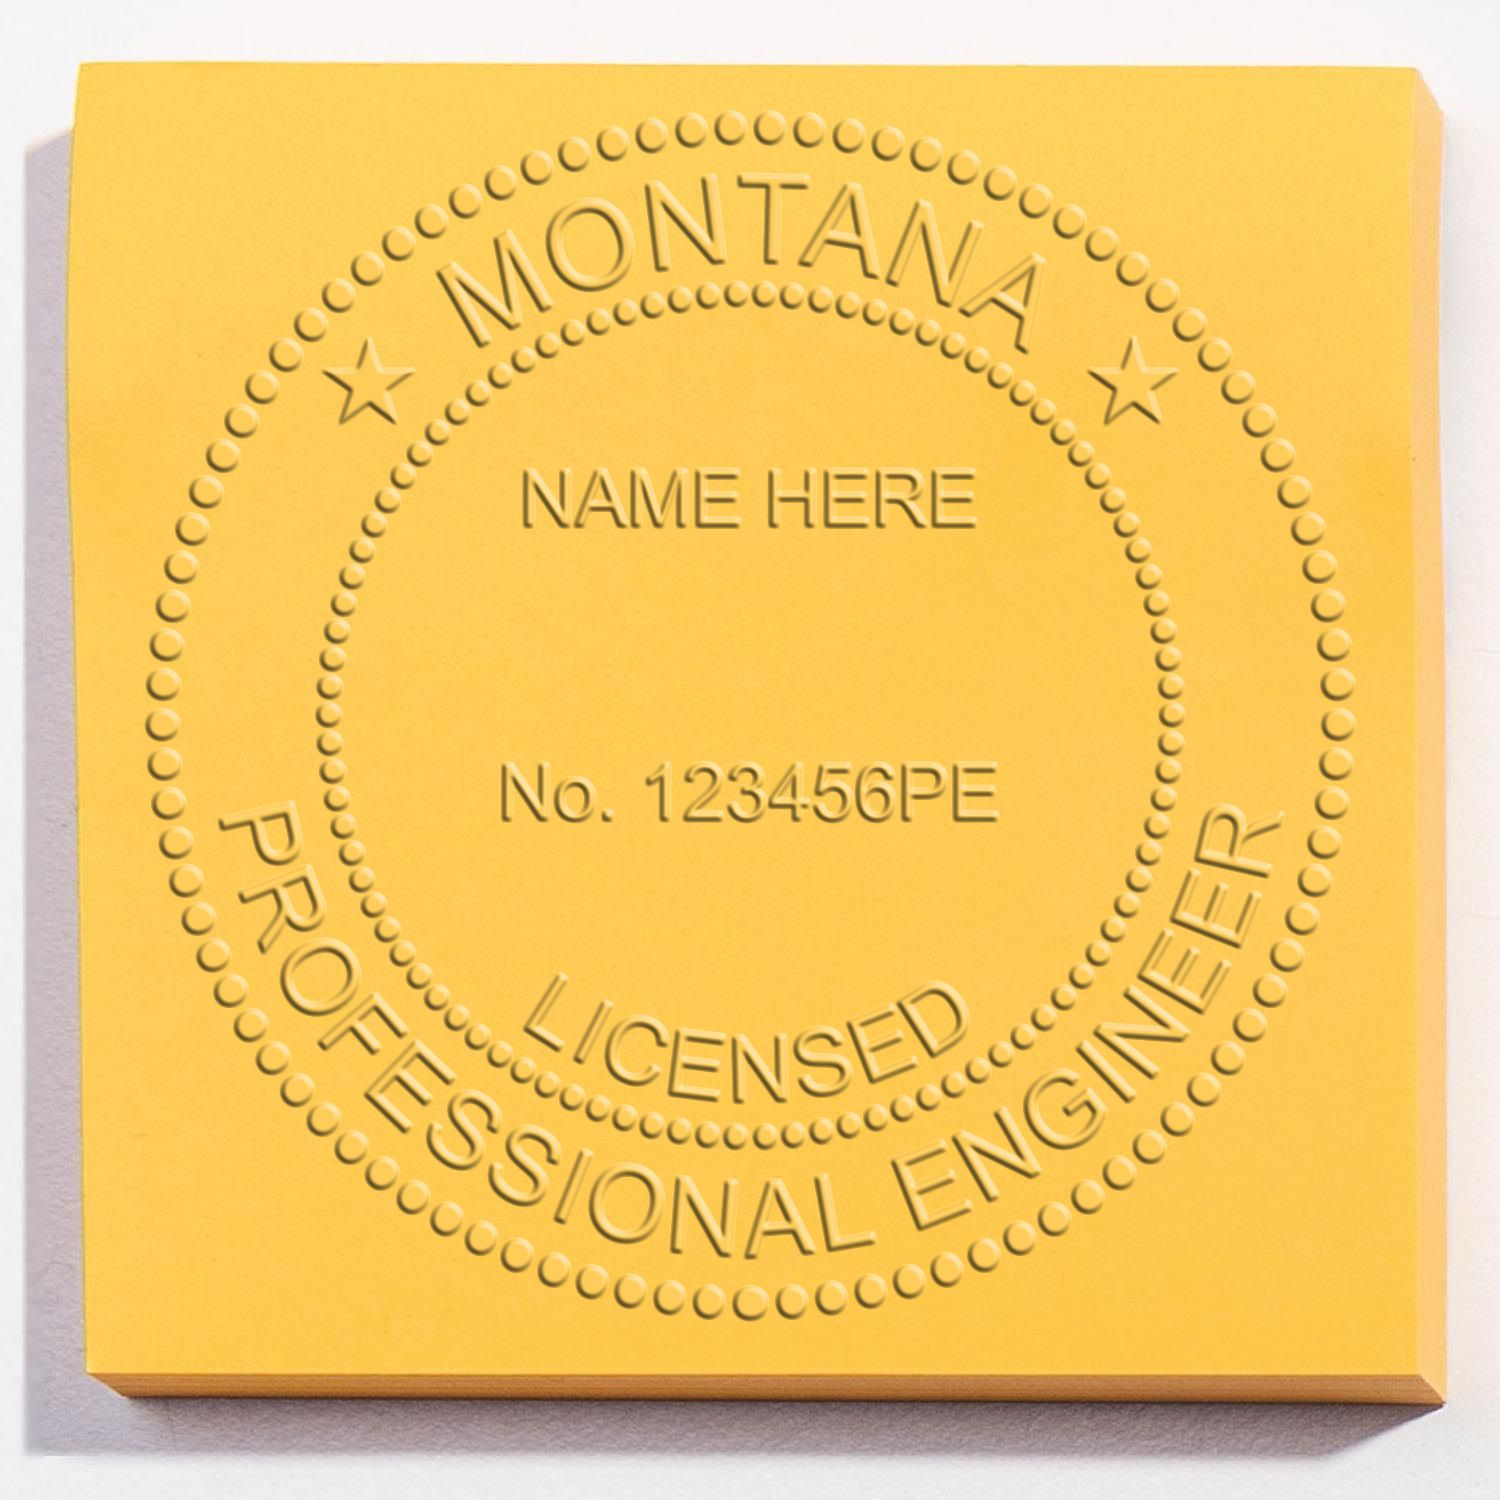 The State of Montana Extended Long Reach Engineer Seal stamp impression comes to life with a crisp, detailed photo on paper - showcasing true professional quality.